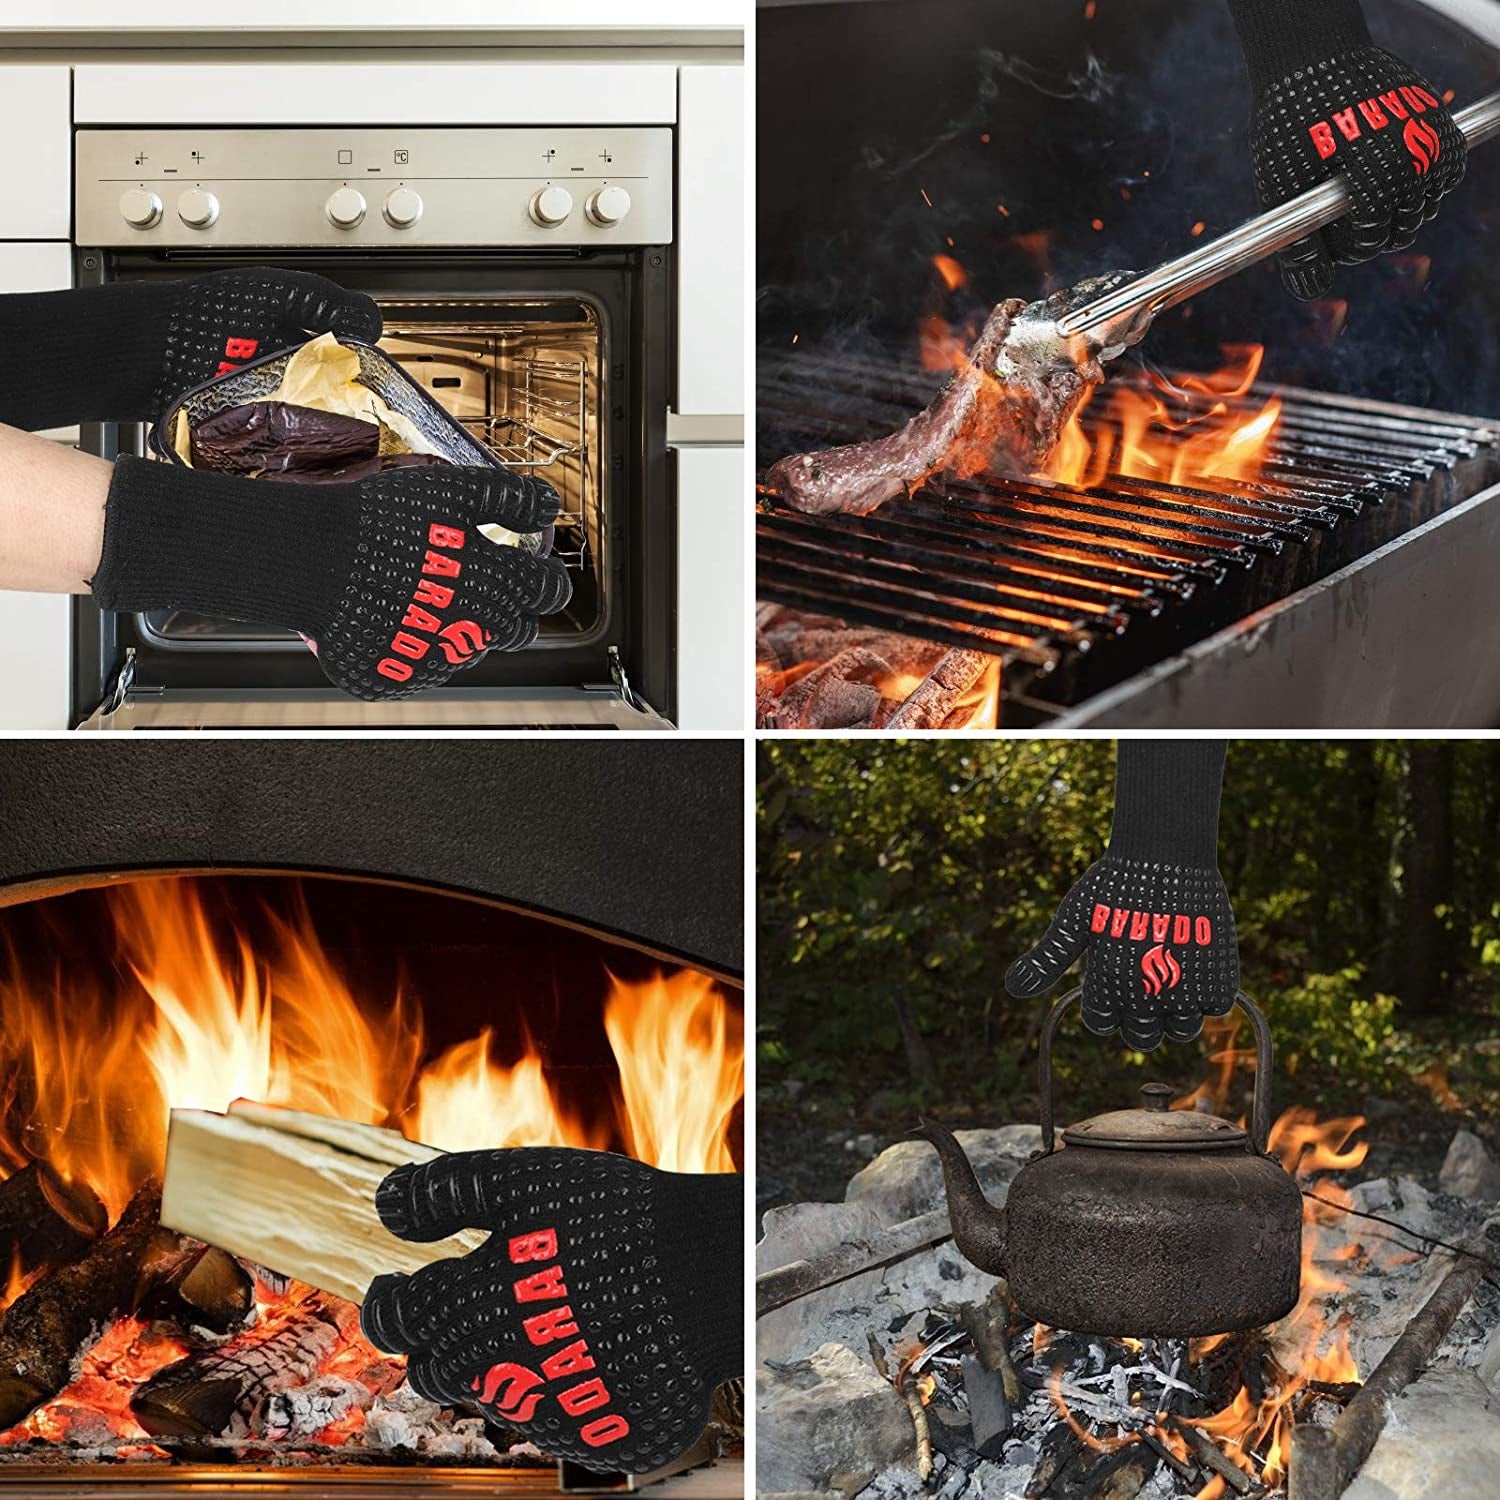 BBQ Gloves, Grill Gloves Extreme Heat Resistant, Barbecue Grilling Oven Gloves with Non-Slip Silicone Coating for Barbecue